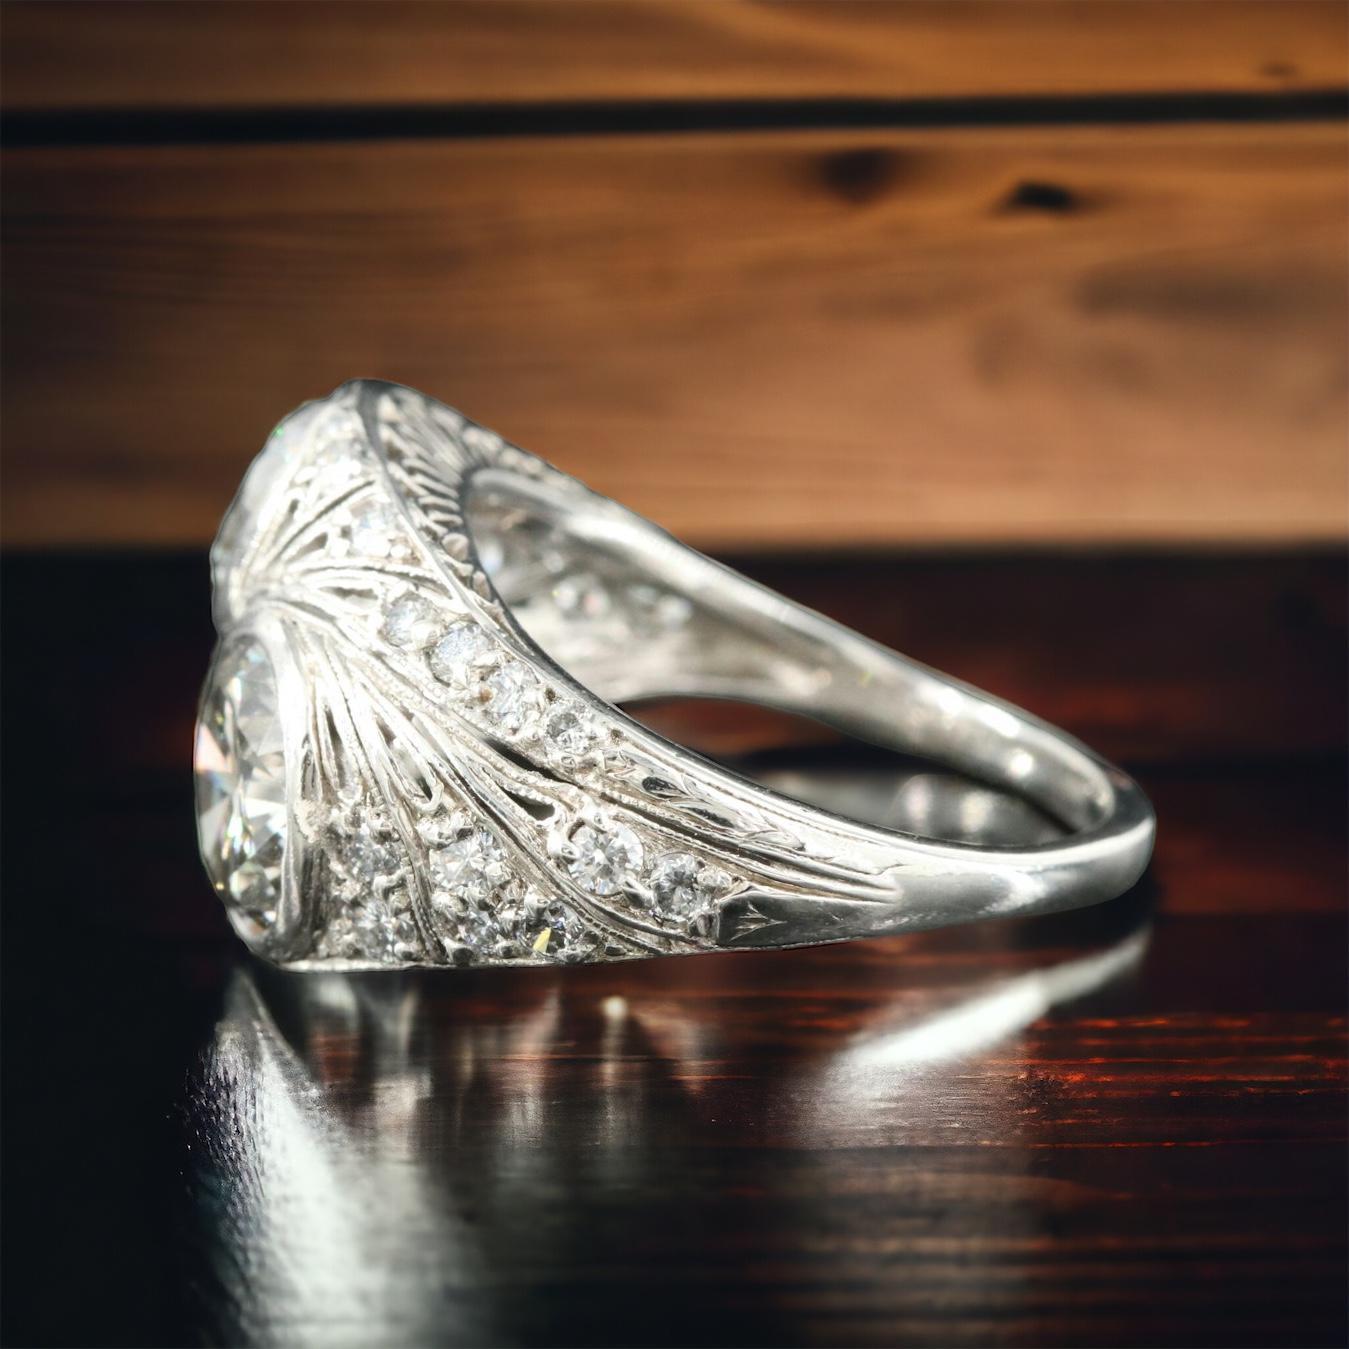 Crafted in the elegant Art Deco style, this platinum ring exudes timeless sophistication. The centerpiece boasts a dazzling 1.59-carat diamond flanked by a resplendent 1.20-carat counterpart, creating a striking contrast. Surrounding these exquisite